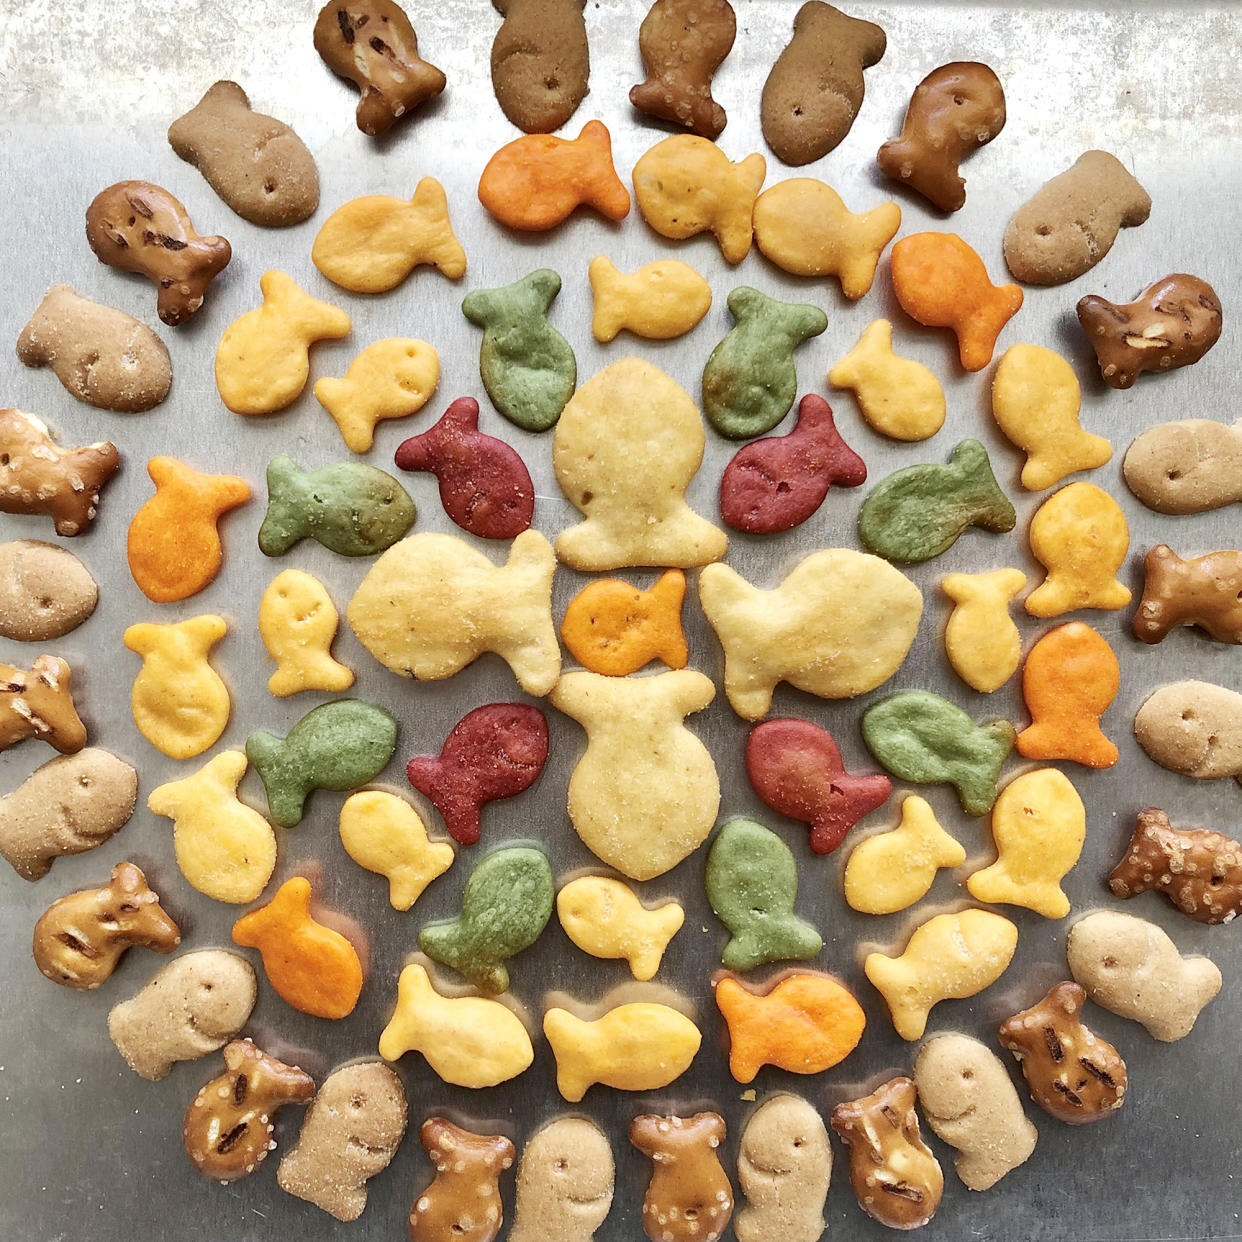 Express yourself with different sizes of Goldfish crackers. As a nutritional professional, I assure you this is totally normal behavior. (Heather Martin)